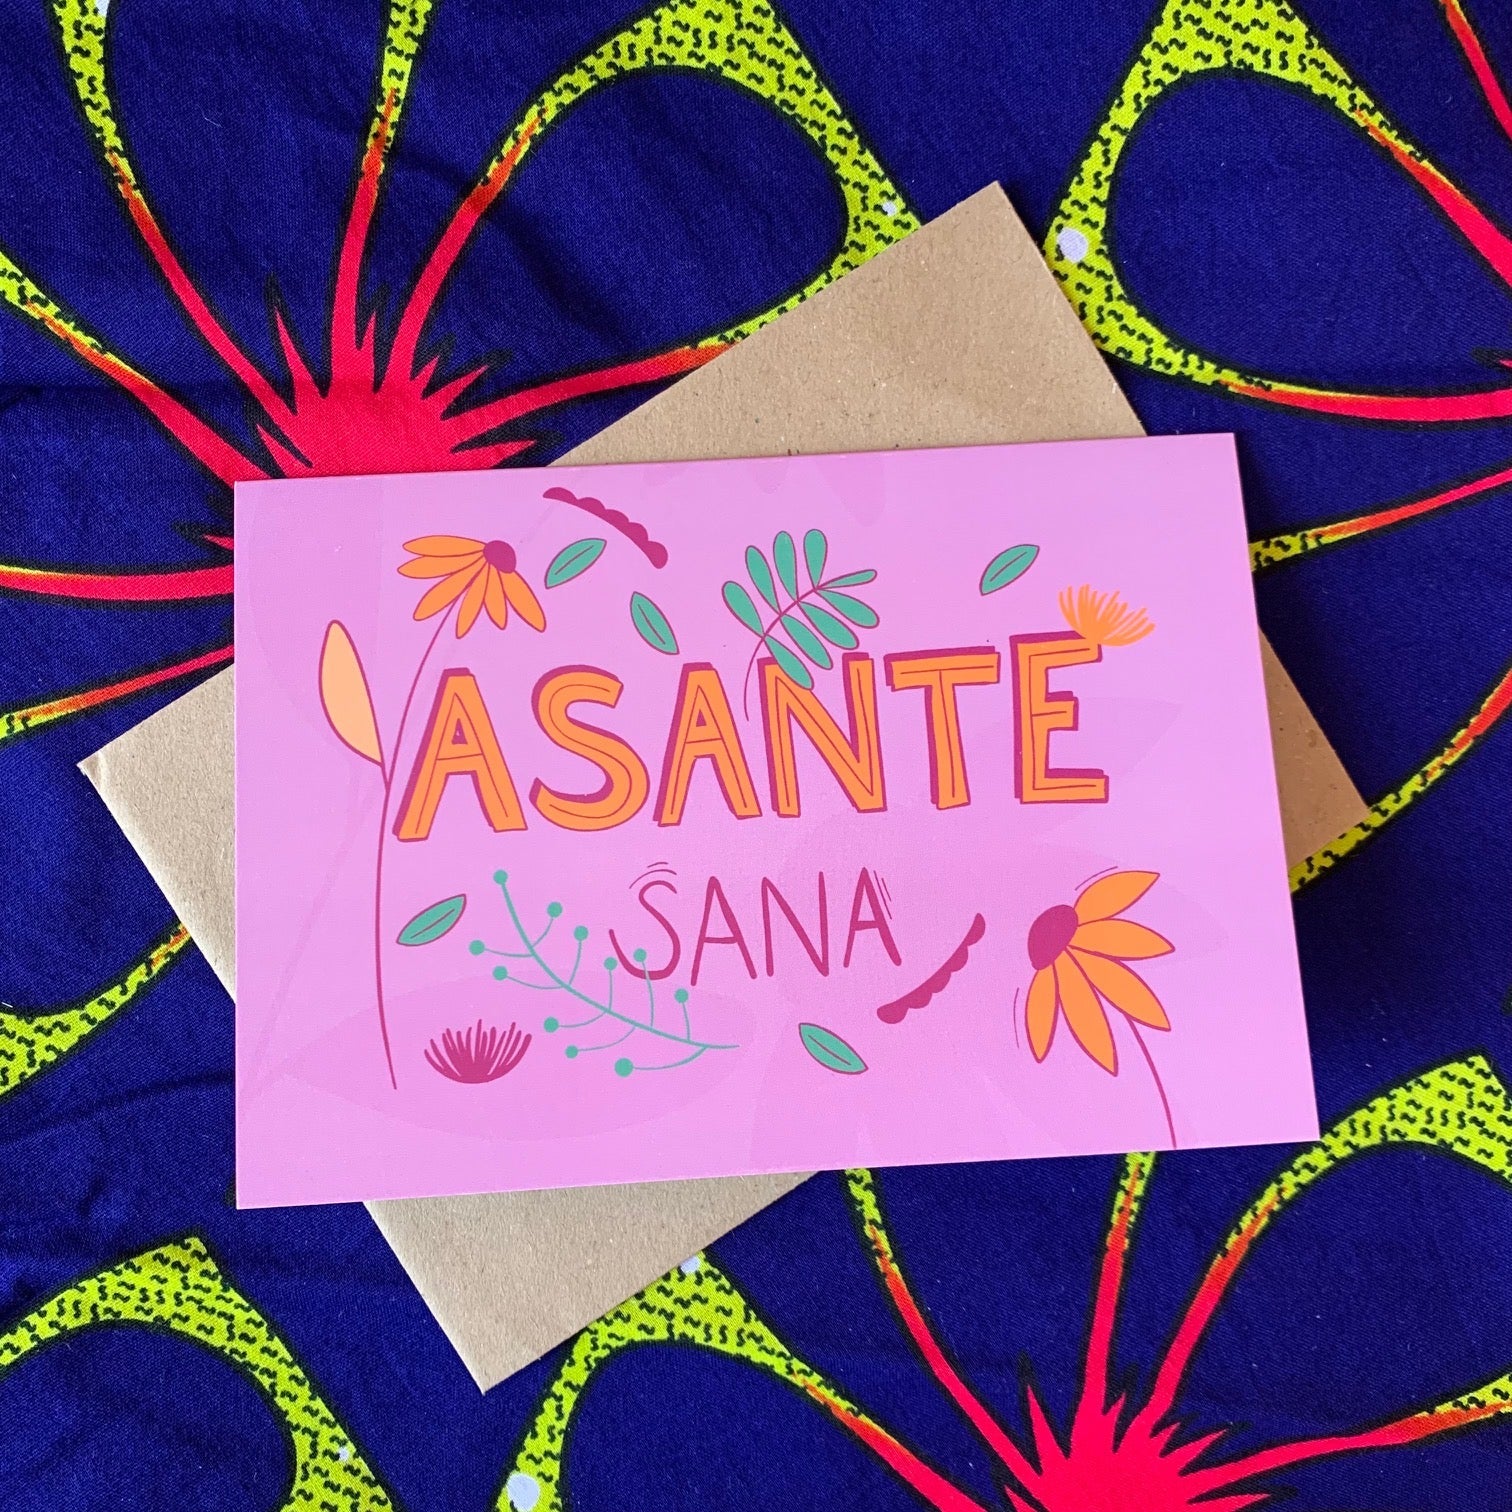 The display of pink floral greeting card with a "Asanta Sana" which means Thank You